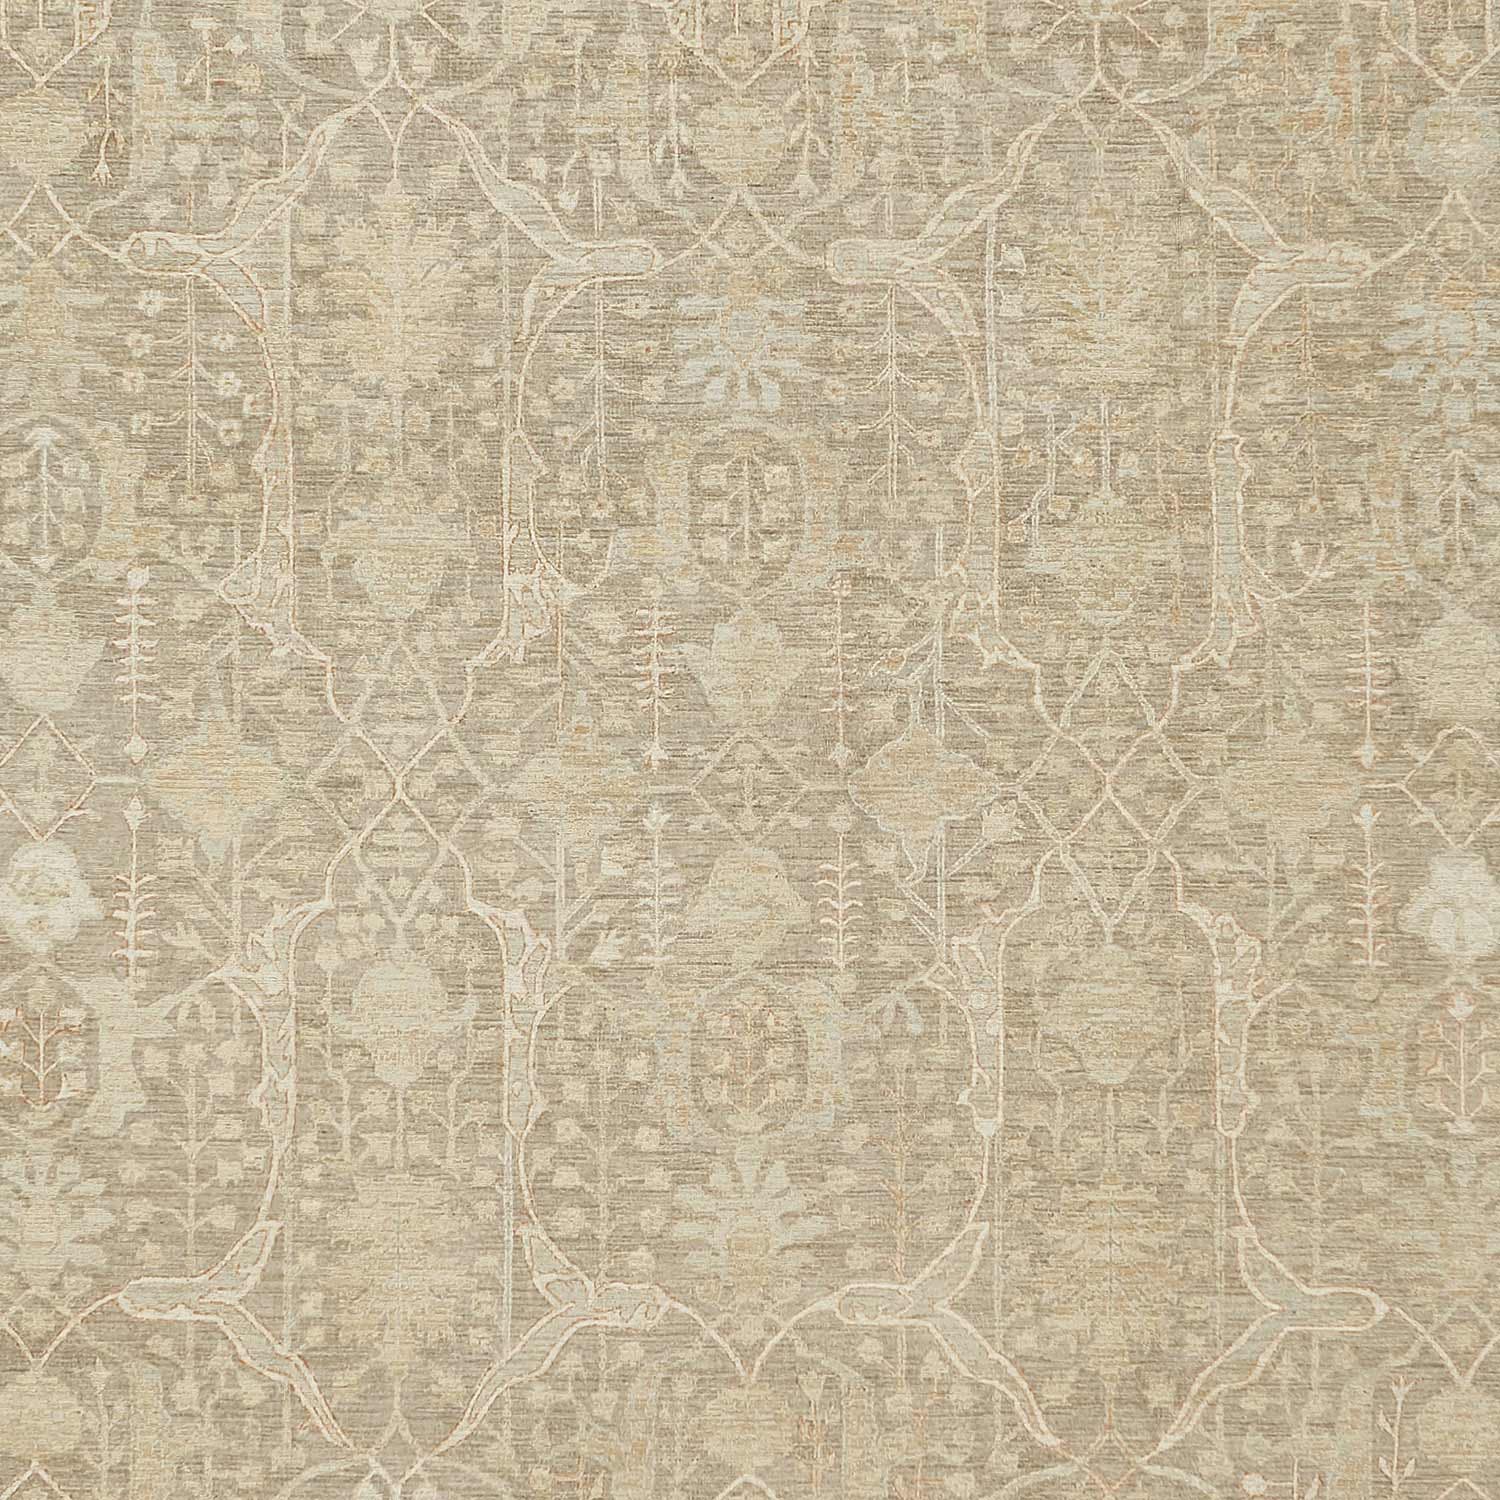 Intricate symmetrical patterned fabric in neutral tones for home decor.